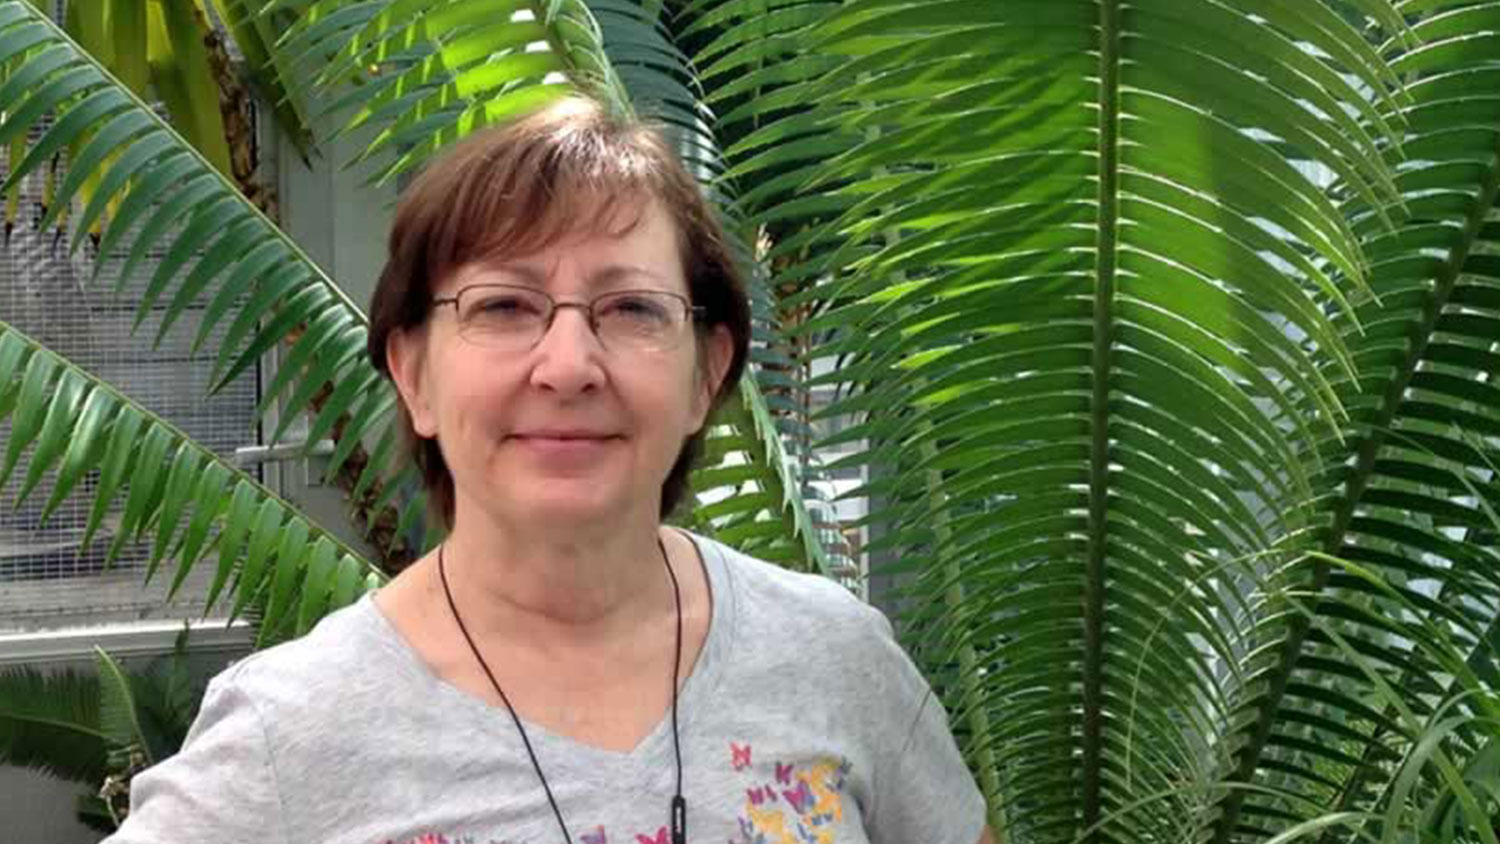 White woman with glasses with large fern in the background.